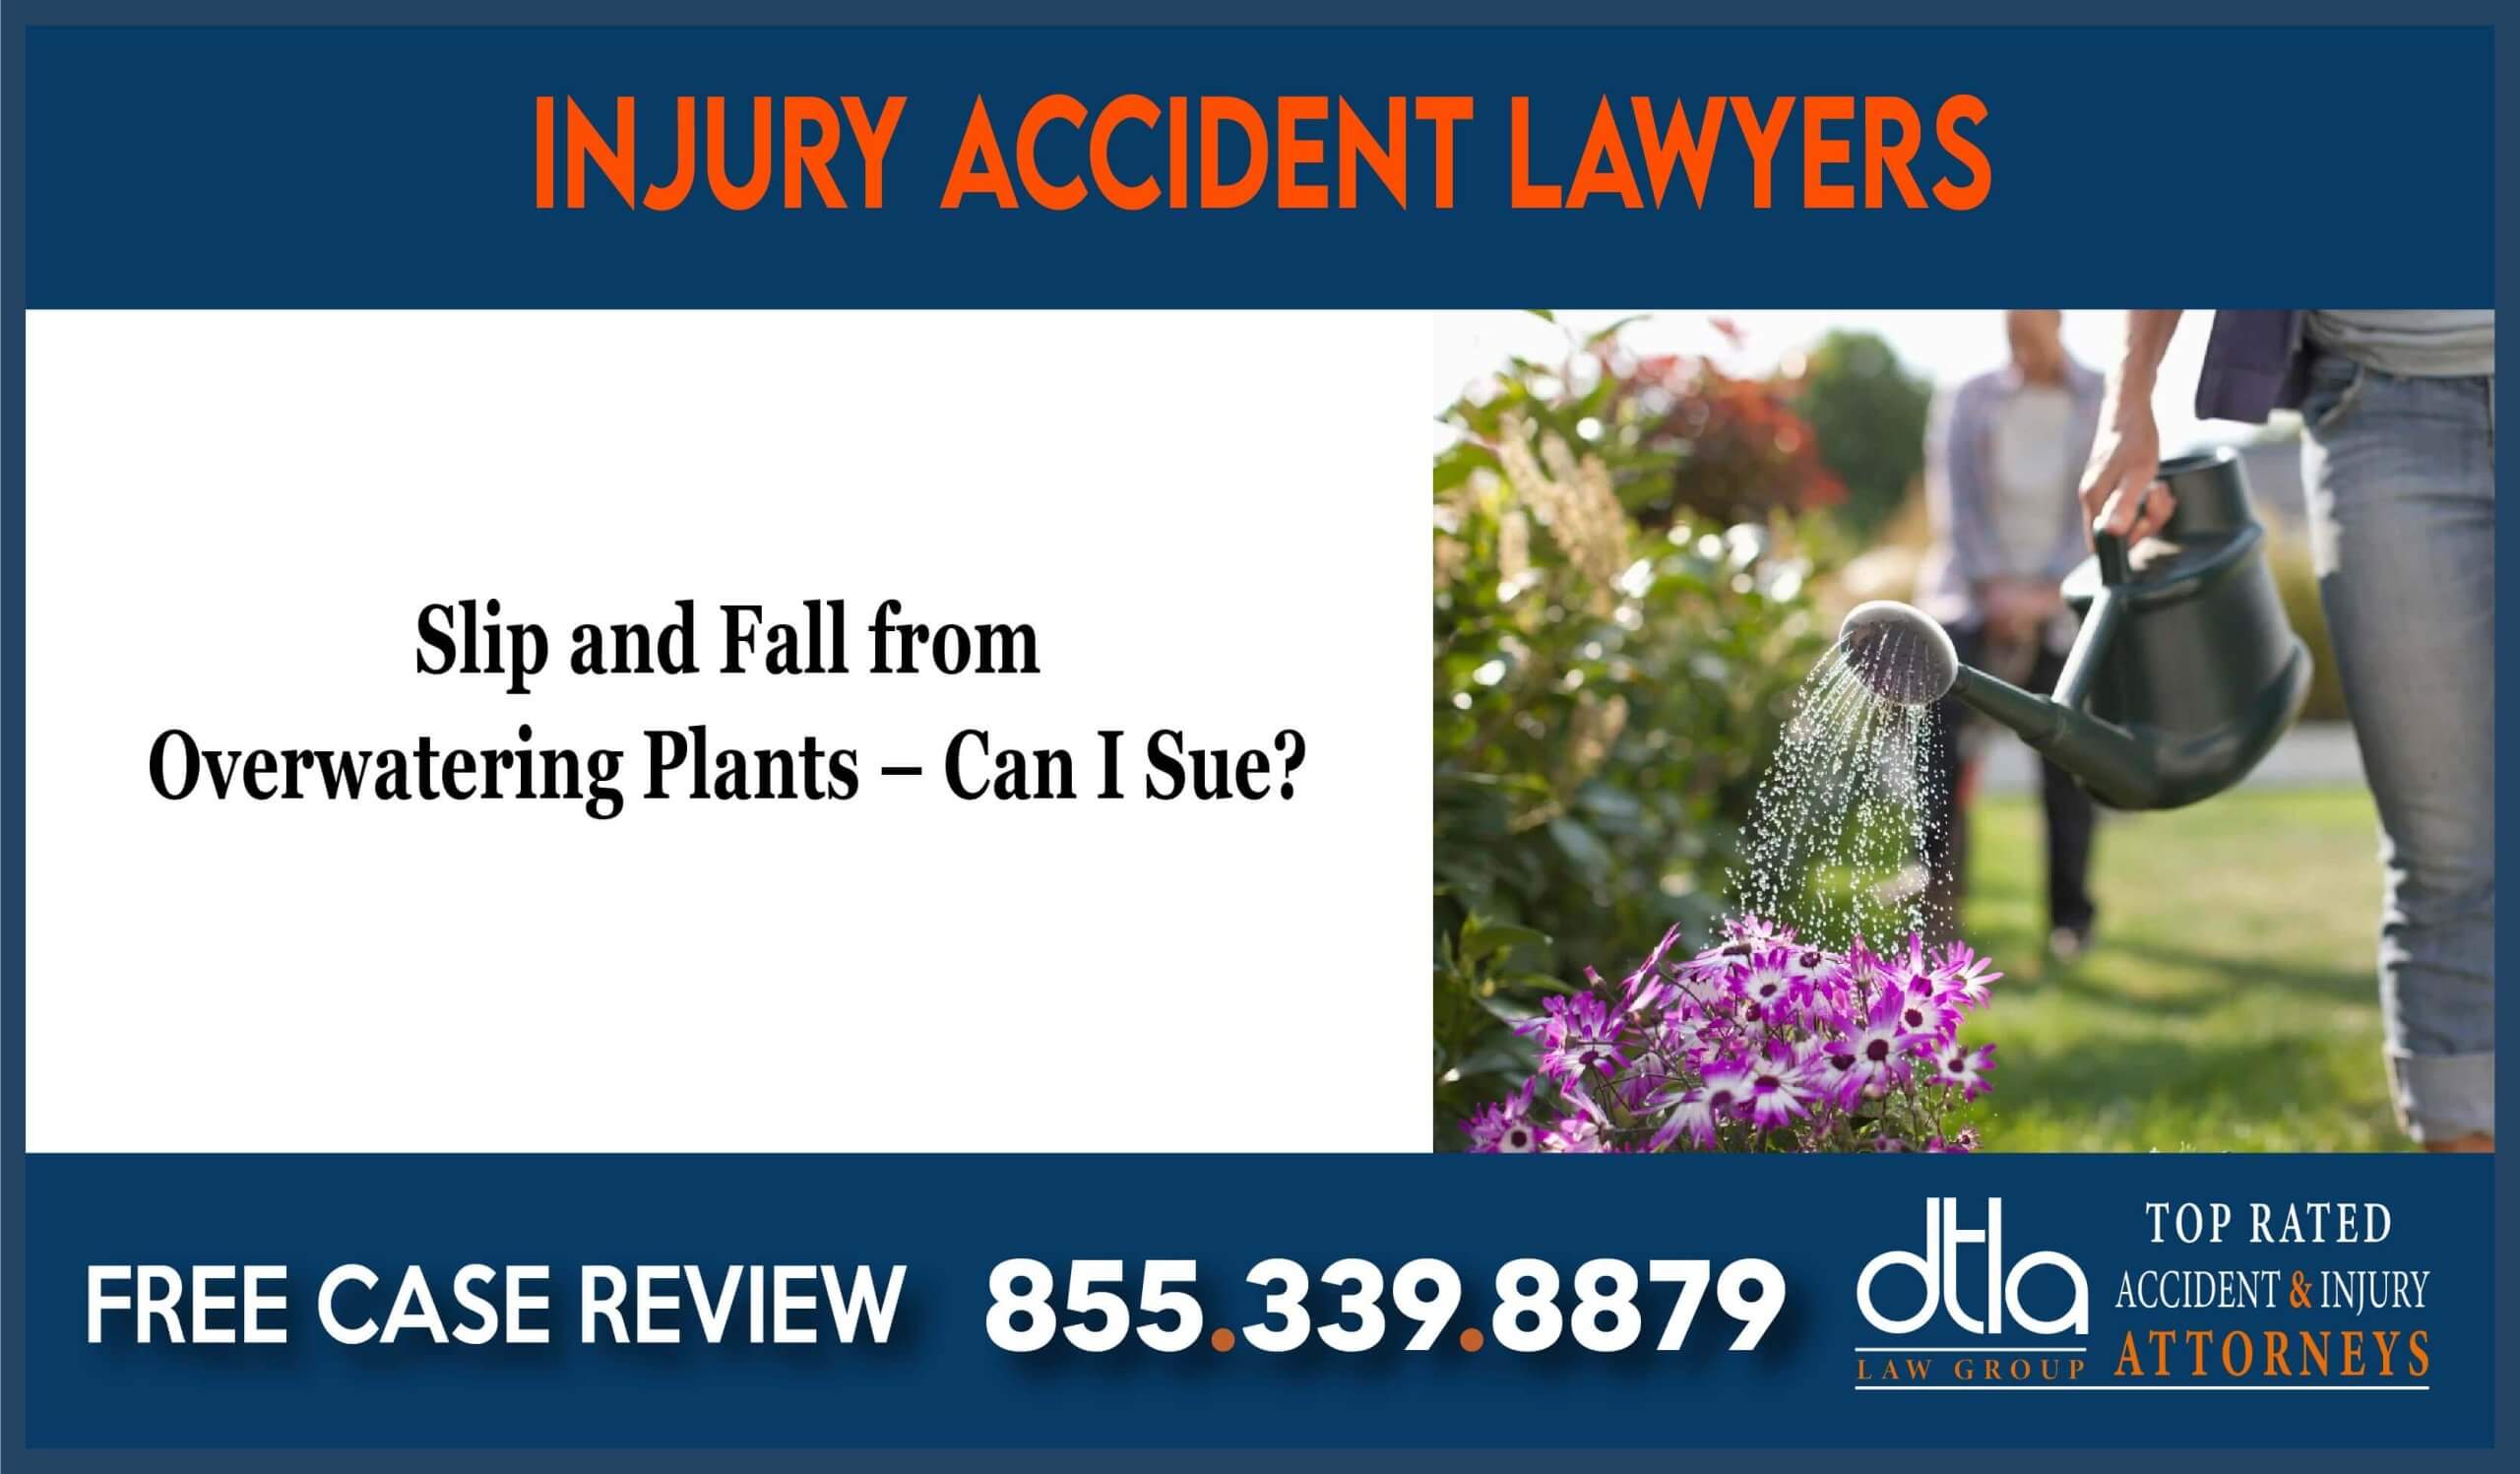 Slip and Fall from Overwatering Plants Can I Sue lawyer attorney compenastion liability